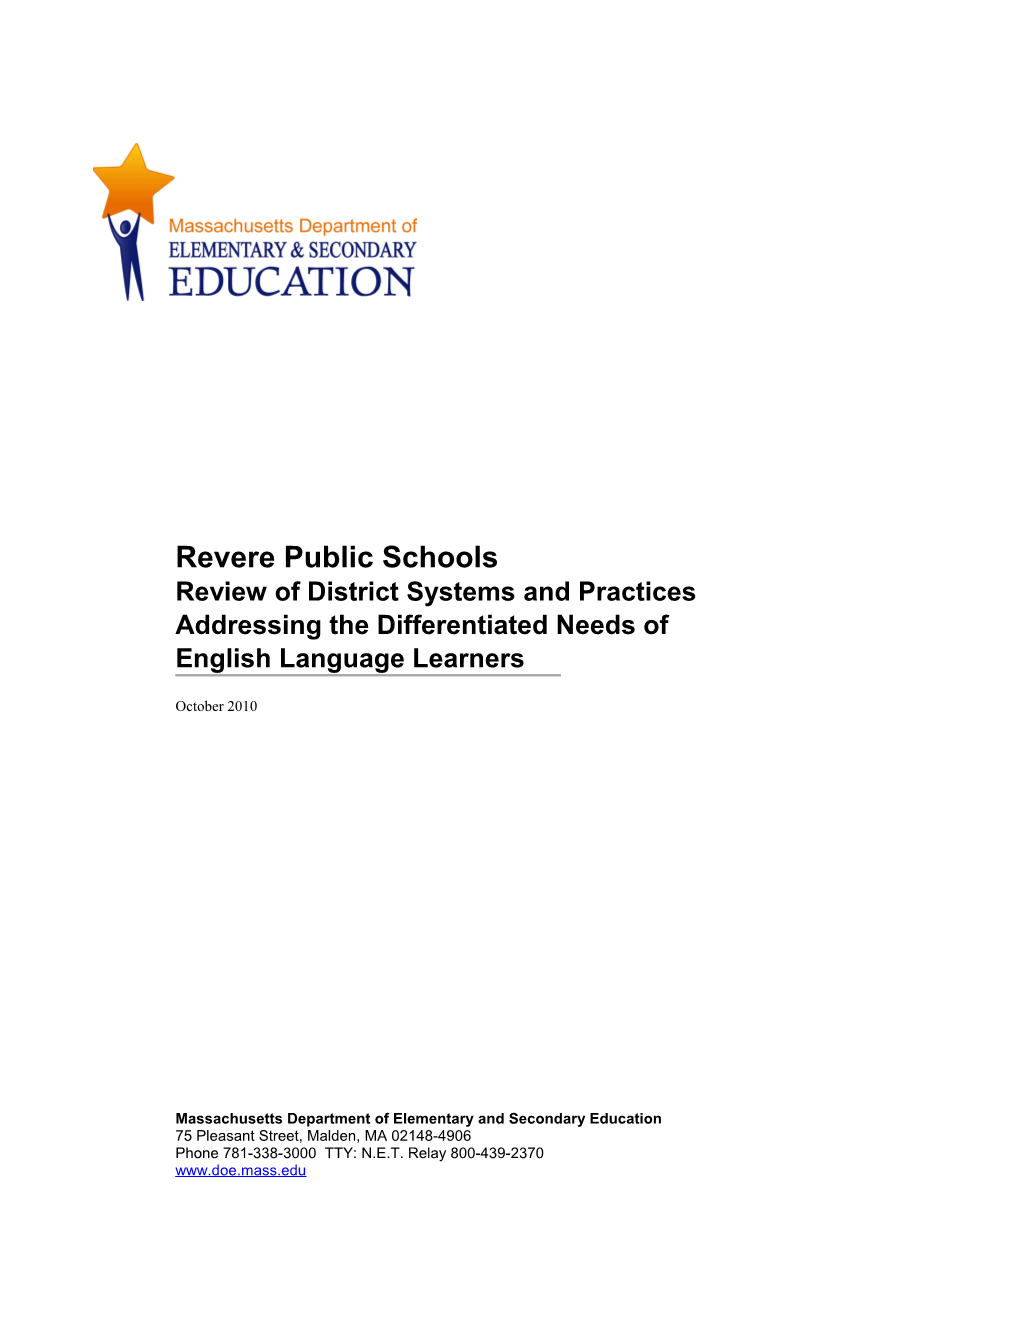 Revere Public Schools, Differentiated Needs (LEP) Review Report, October 2010